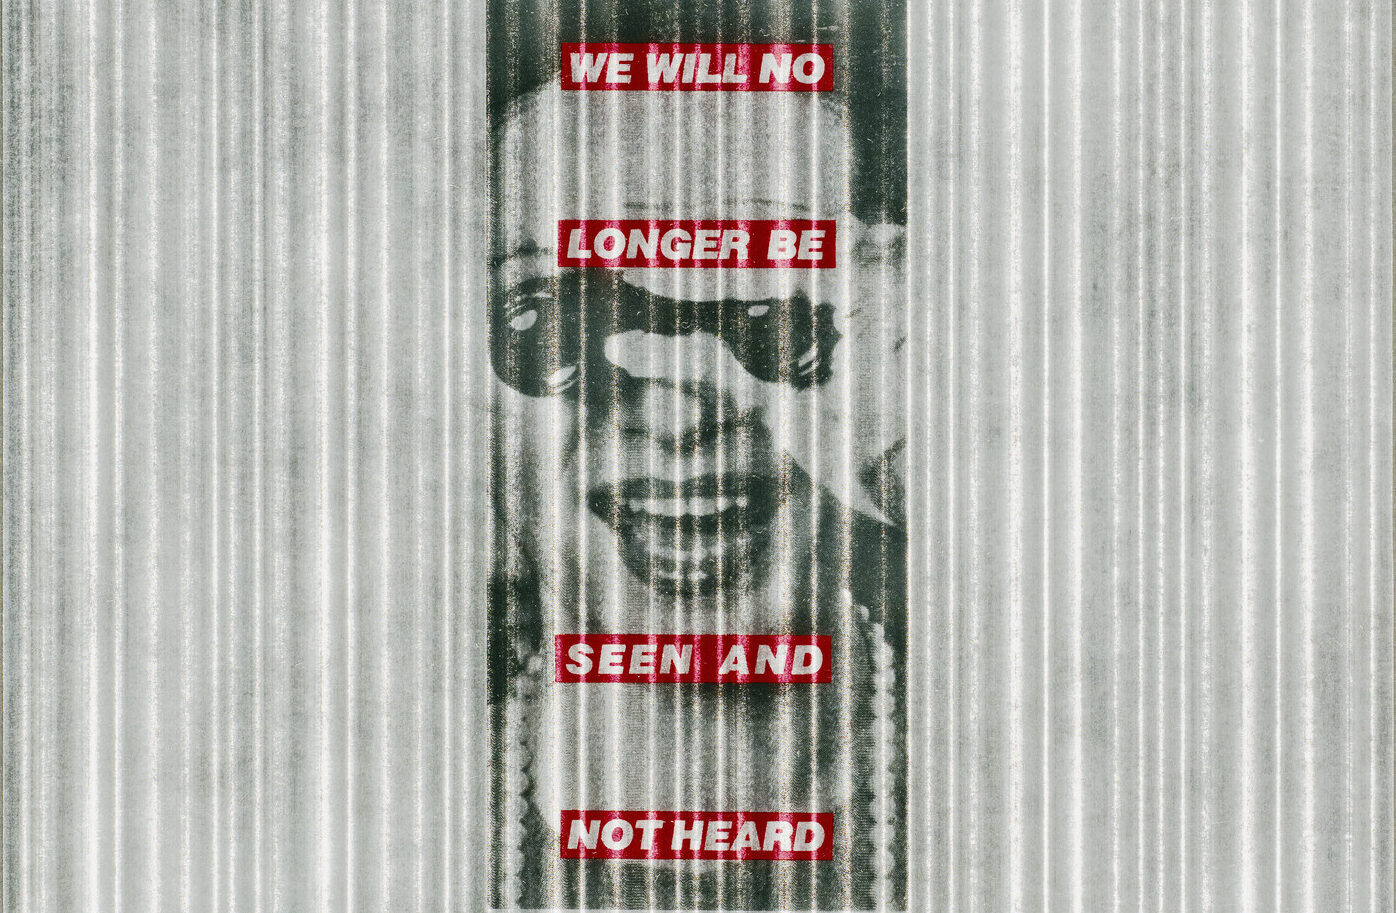 A black-and-white image of a light-skinned woman is centered atop a grey-and-white vertically striped background. She wears pearls and holds a pair of binoculars to her eyes while smiling widely. Superimposed over the image are four red horizontal bands with the phrase 'We will no longer be seen and not heard' in white block letters.